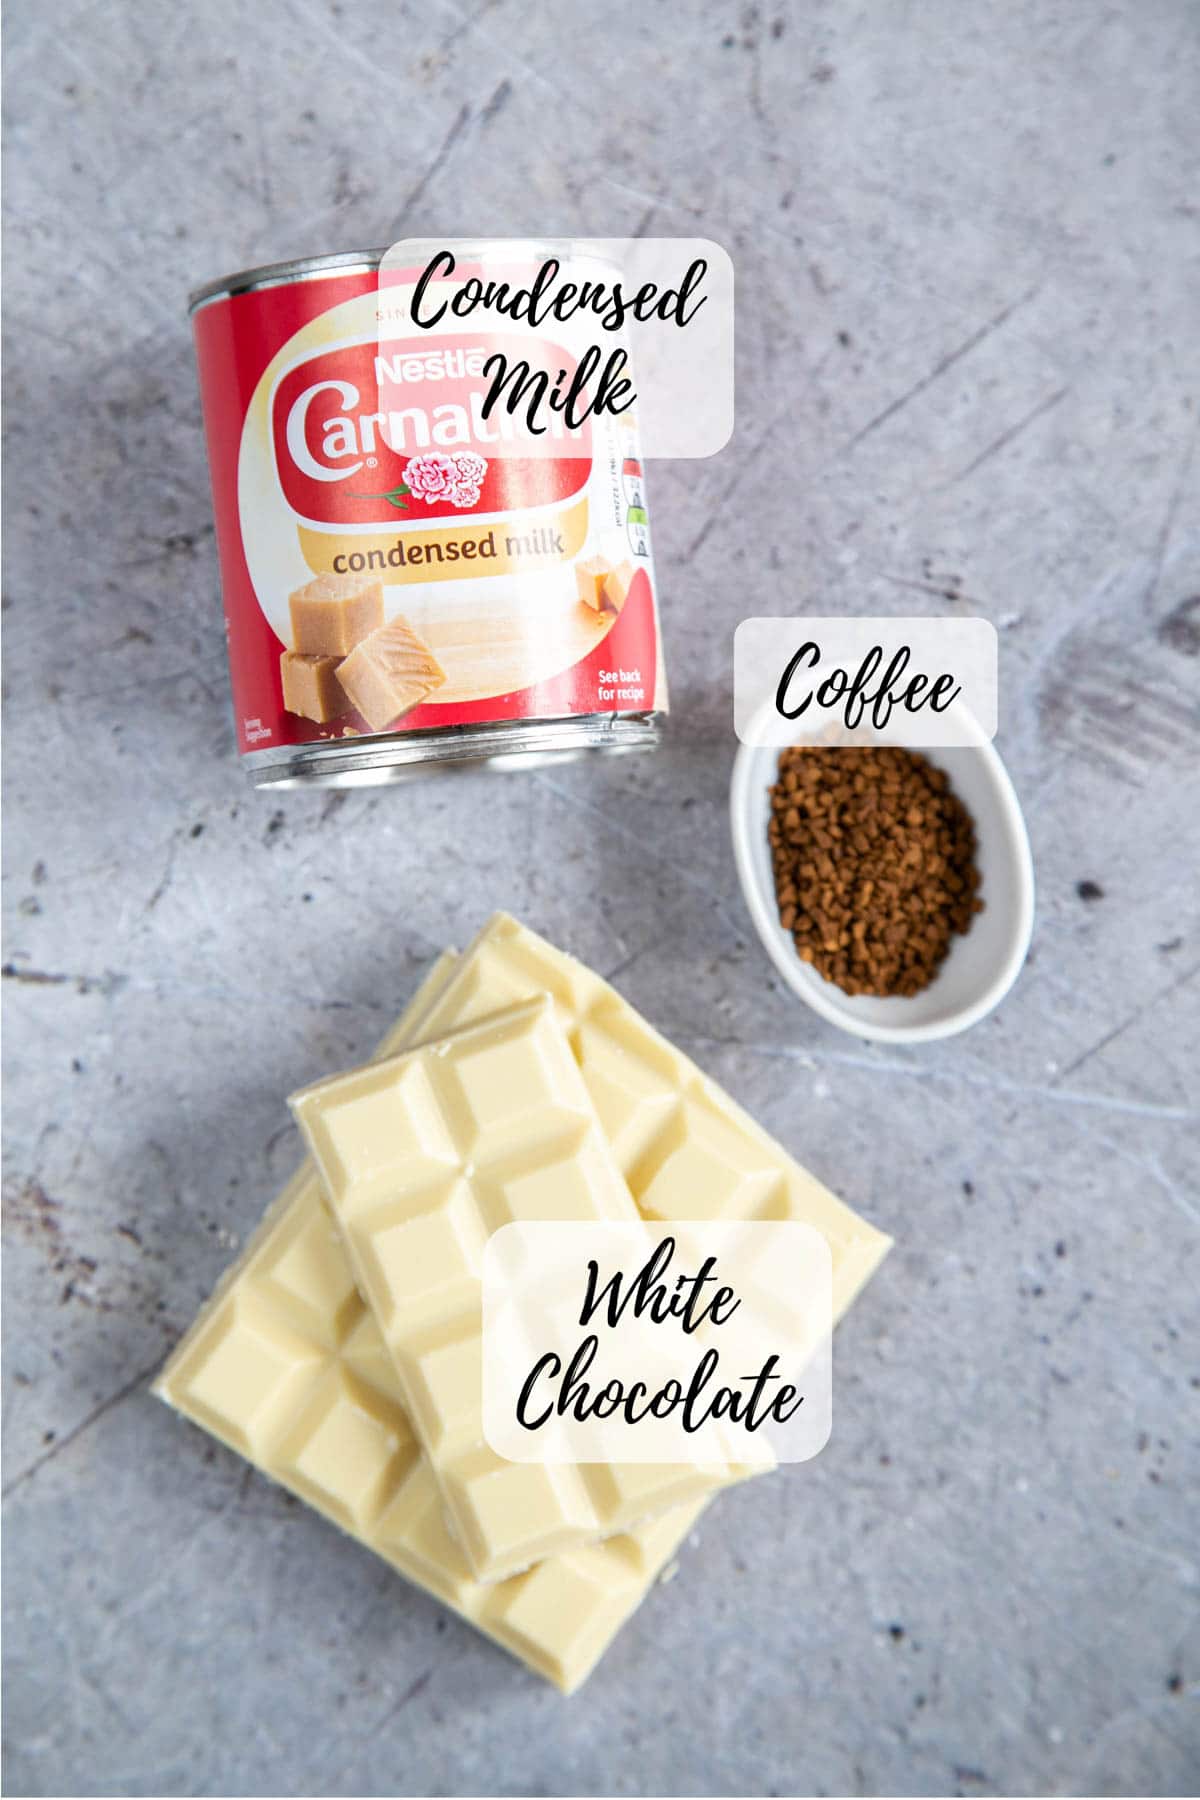 Ingredients for white chocolate coffee fudge: condensed milk, instant coffee, white chocolate. Sprinkles are optional for decoration and are not shown.